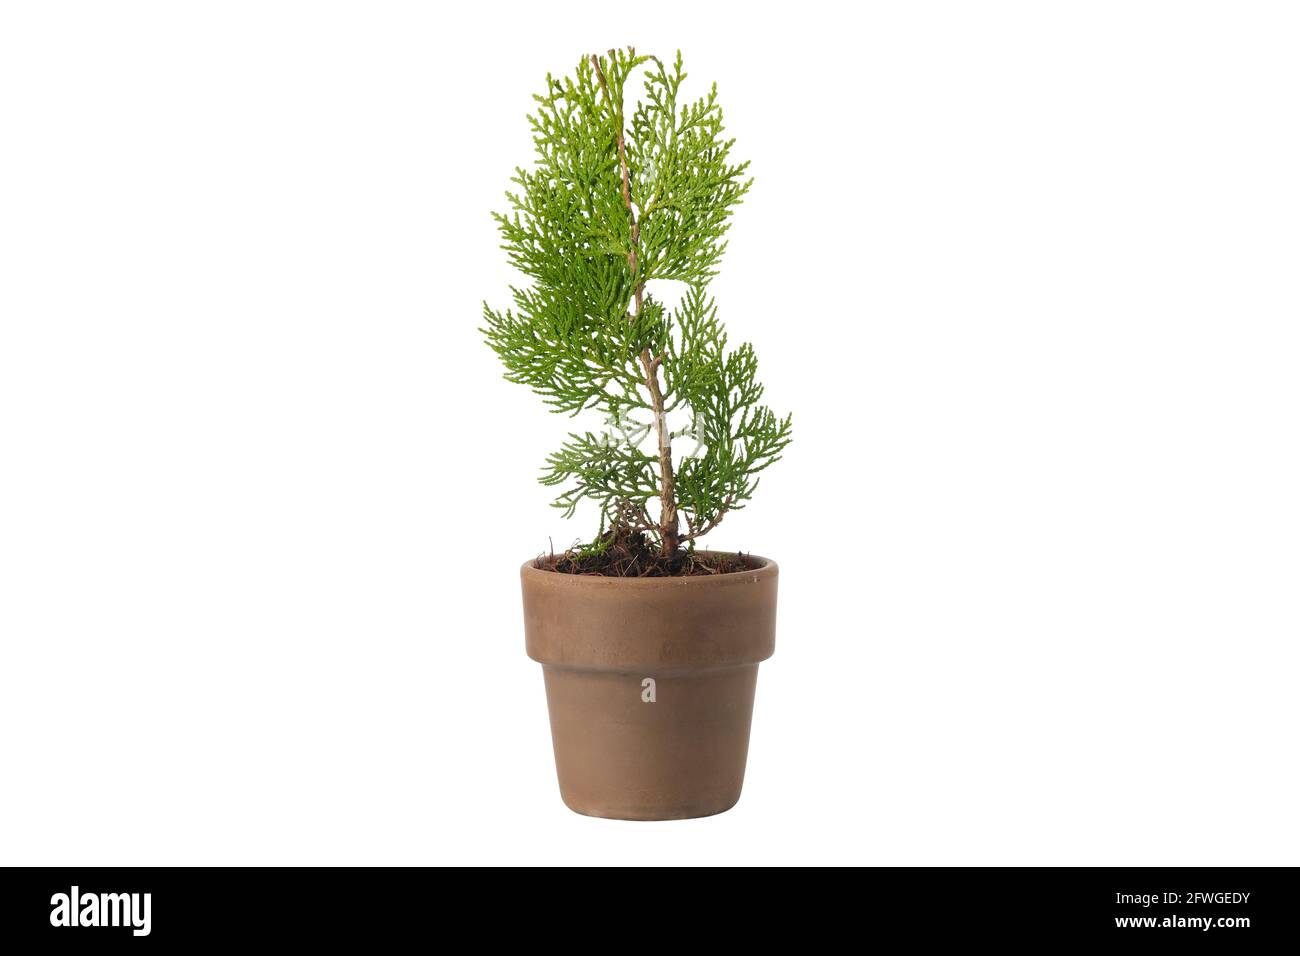 Chinese arborvitae - Platycladus orientalis - seedling in a pot, isolated on white. Type of evergreen thuja. Stock Photo